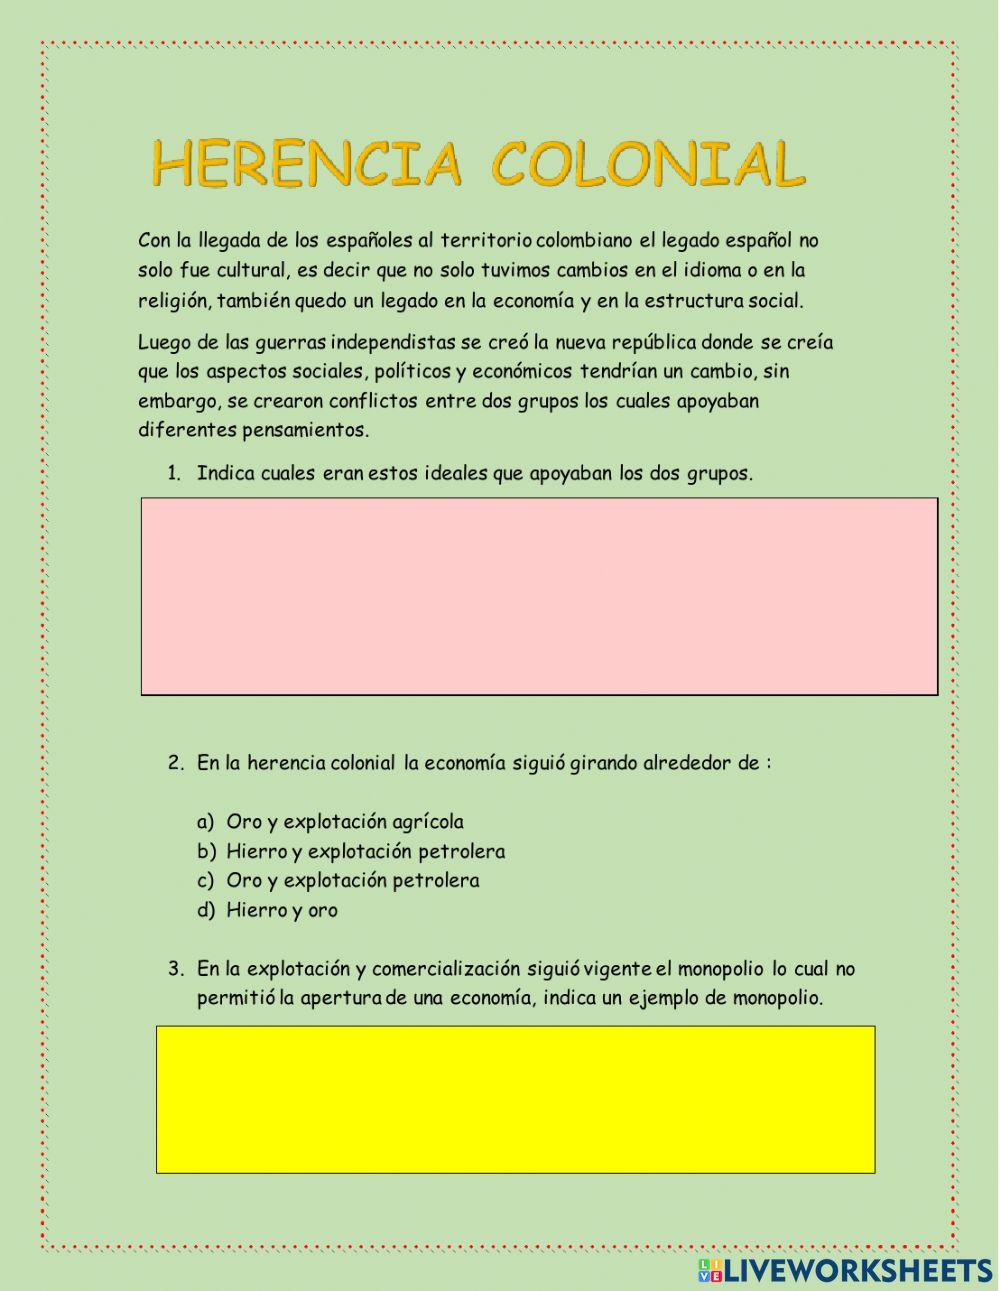 Herencia colonial